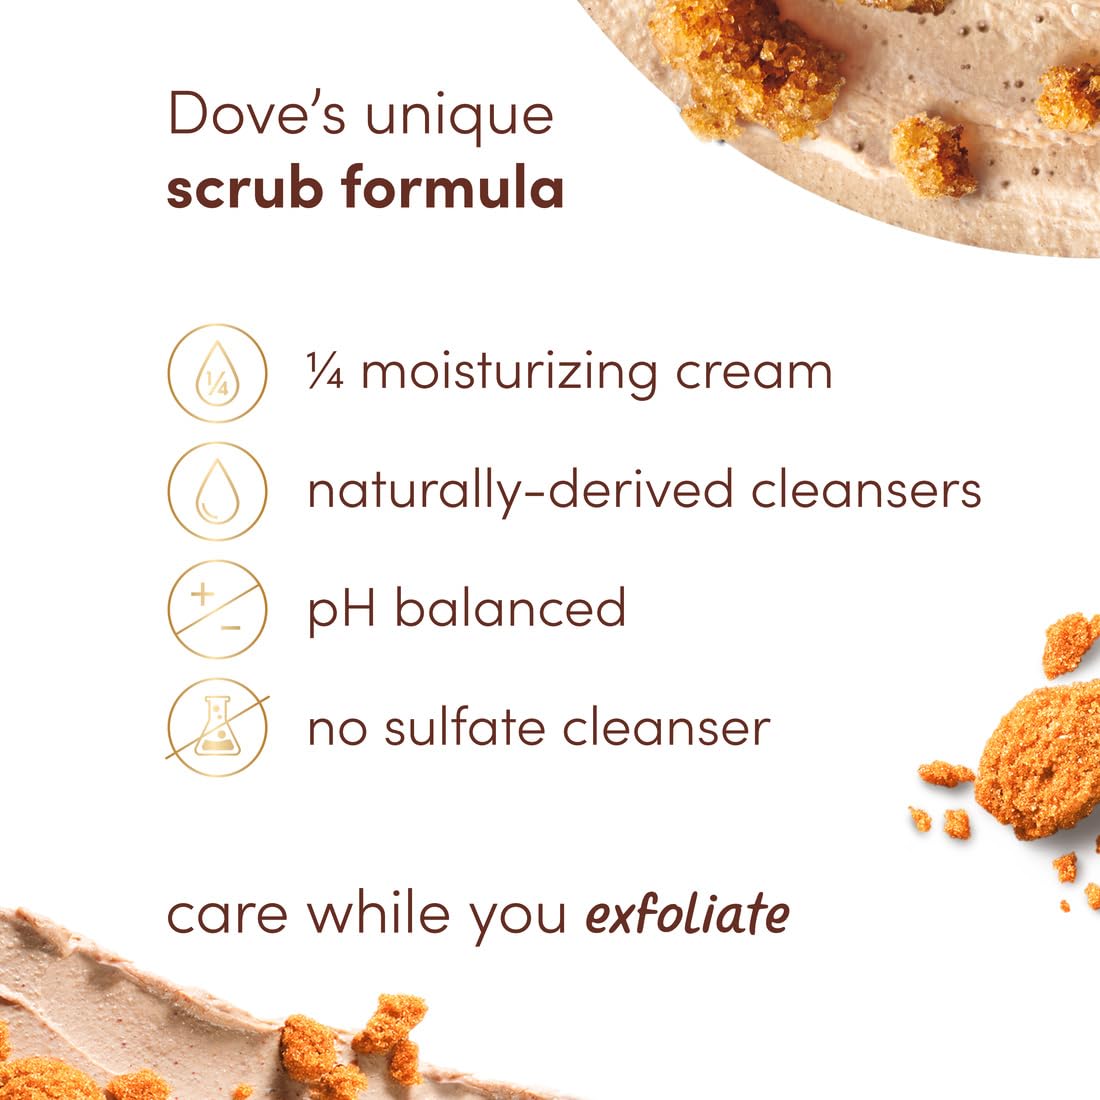 Dove Scrub For Silky Smooth Skin Brown Sugar & Coconut Butter Body Scrub Exfoliates & Restores Skin's Natural Nutrients, 10.5 Ounce (Pack of 4)